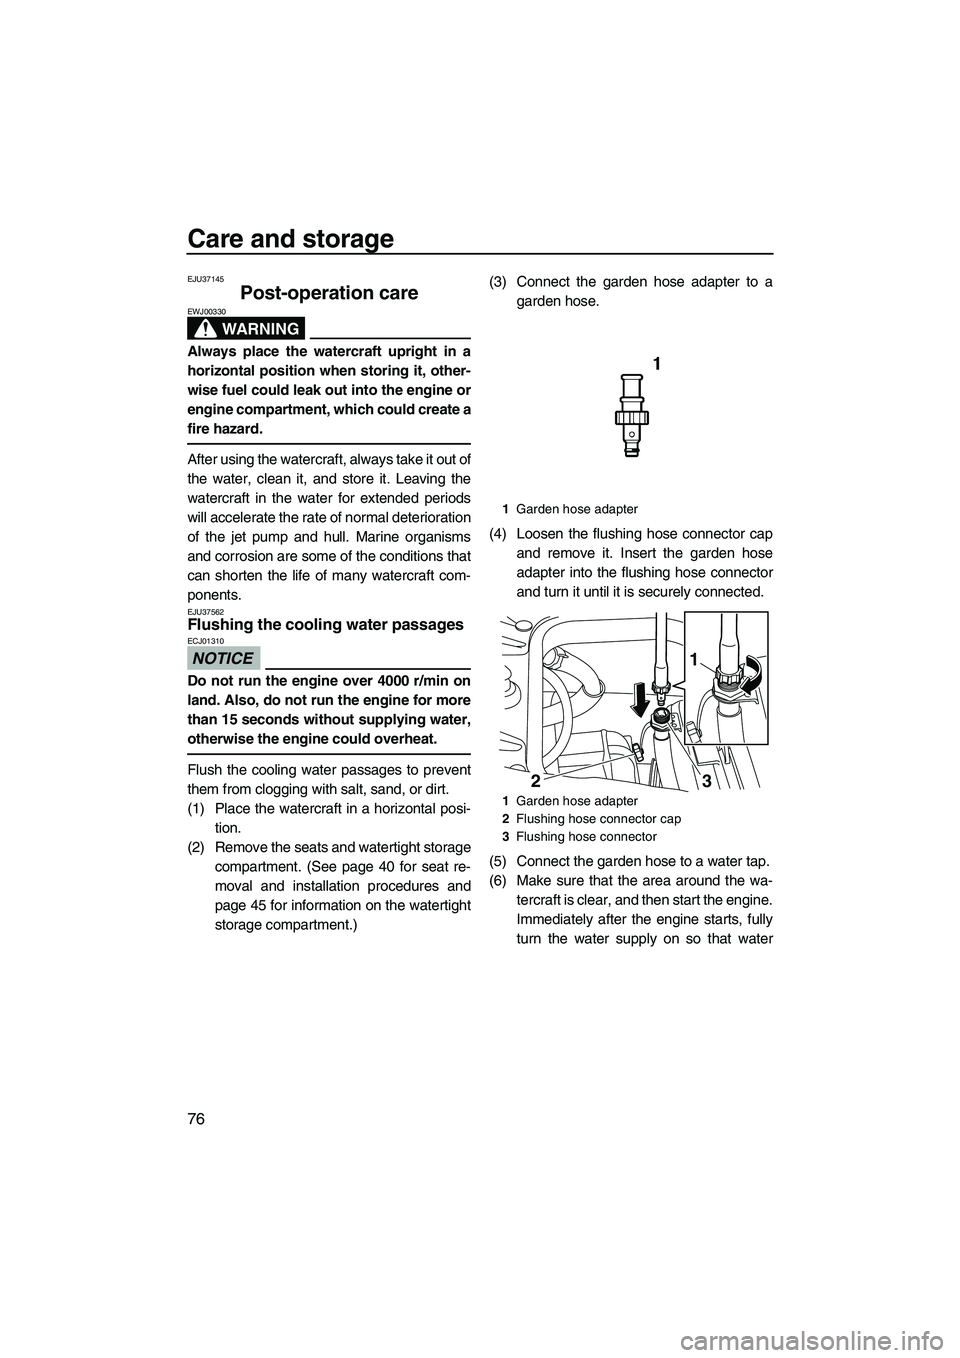 YAMAHA FZR 2012  Owners Manual Care and storage
76
EJU37145
Post-operation care 
WARNING
EWJ00330
Always place the watercraft upright in a
horizontal position when storing it, other-
wise fuel could leak out into the engine or
engi